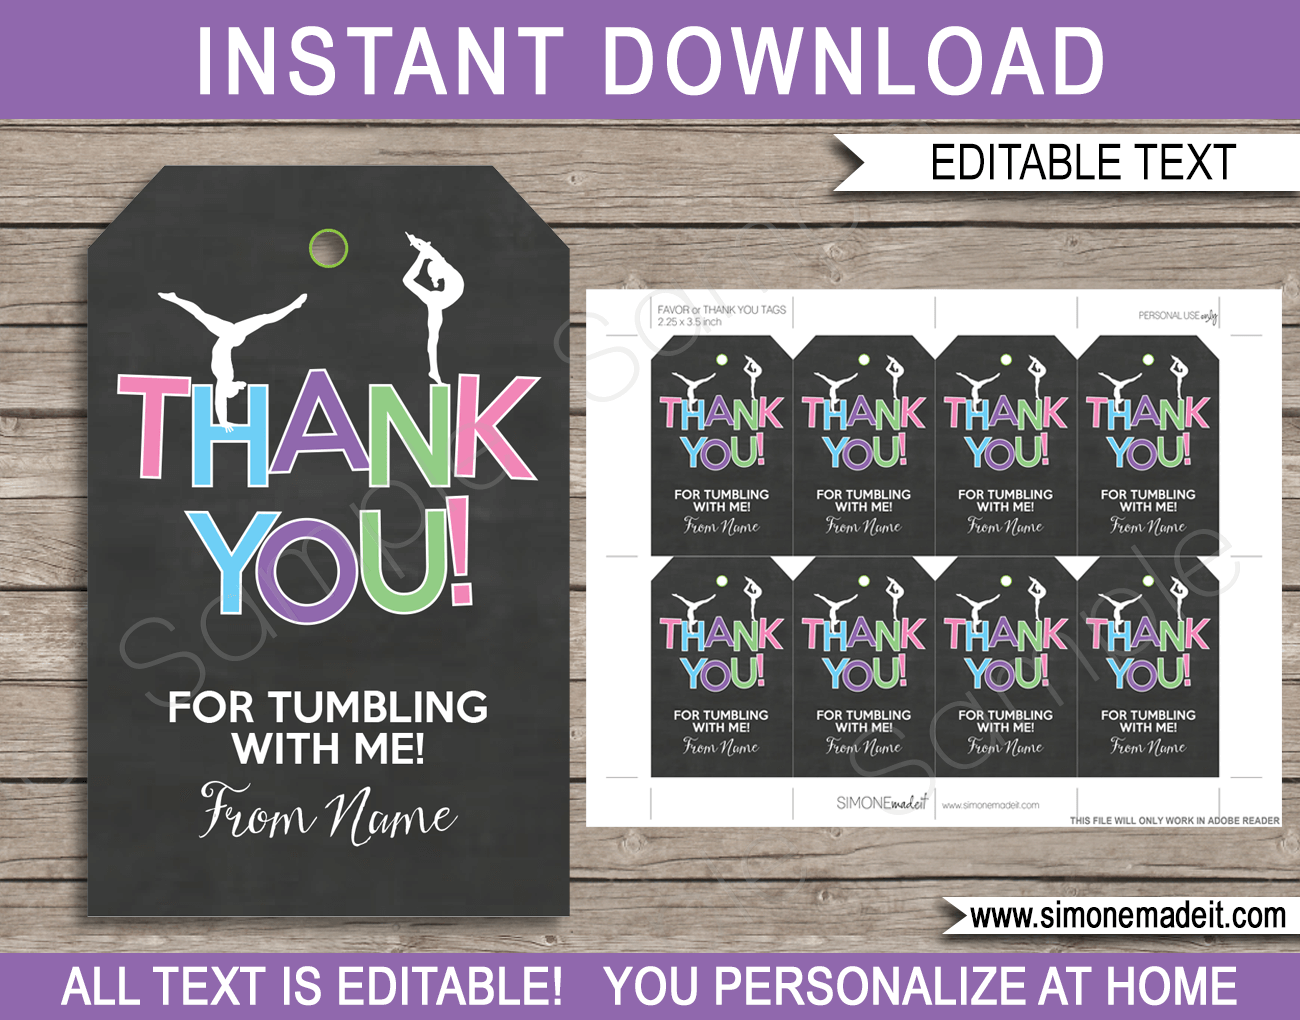 Gymnastics Party Favor Tags | Thank You Tags | Birthday Party | Editable DIY Template | $3.00 INSTANT DOWNLOAD via SIMONEmadeit.com